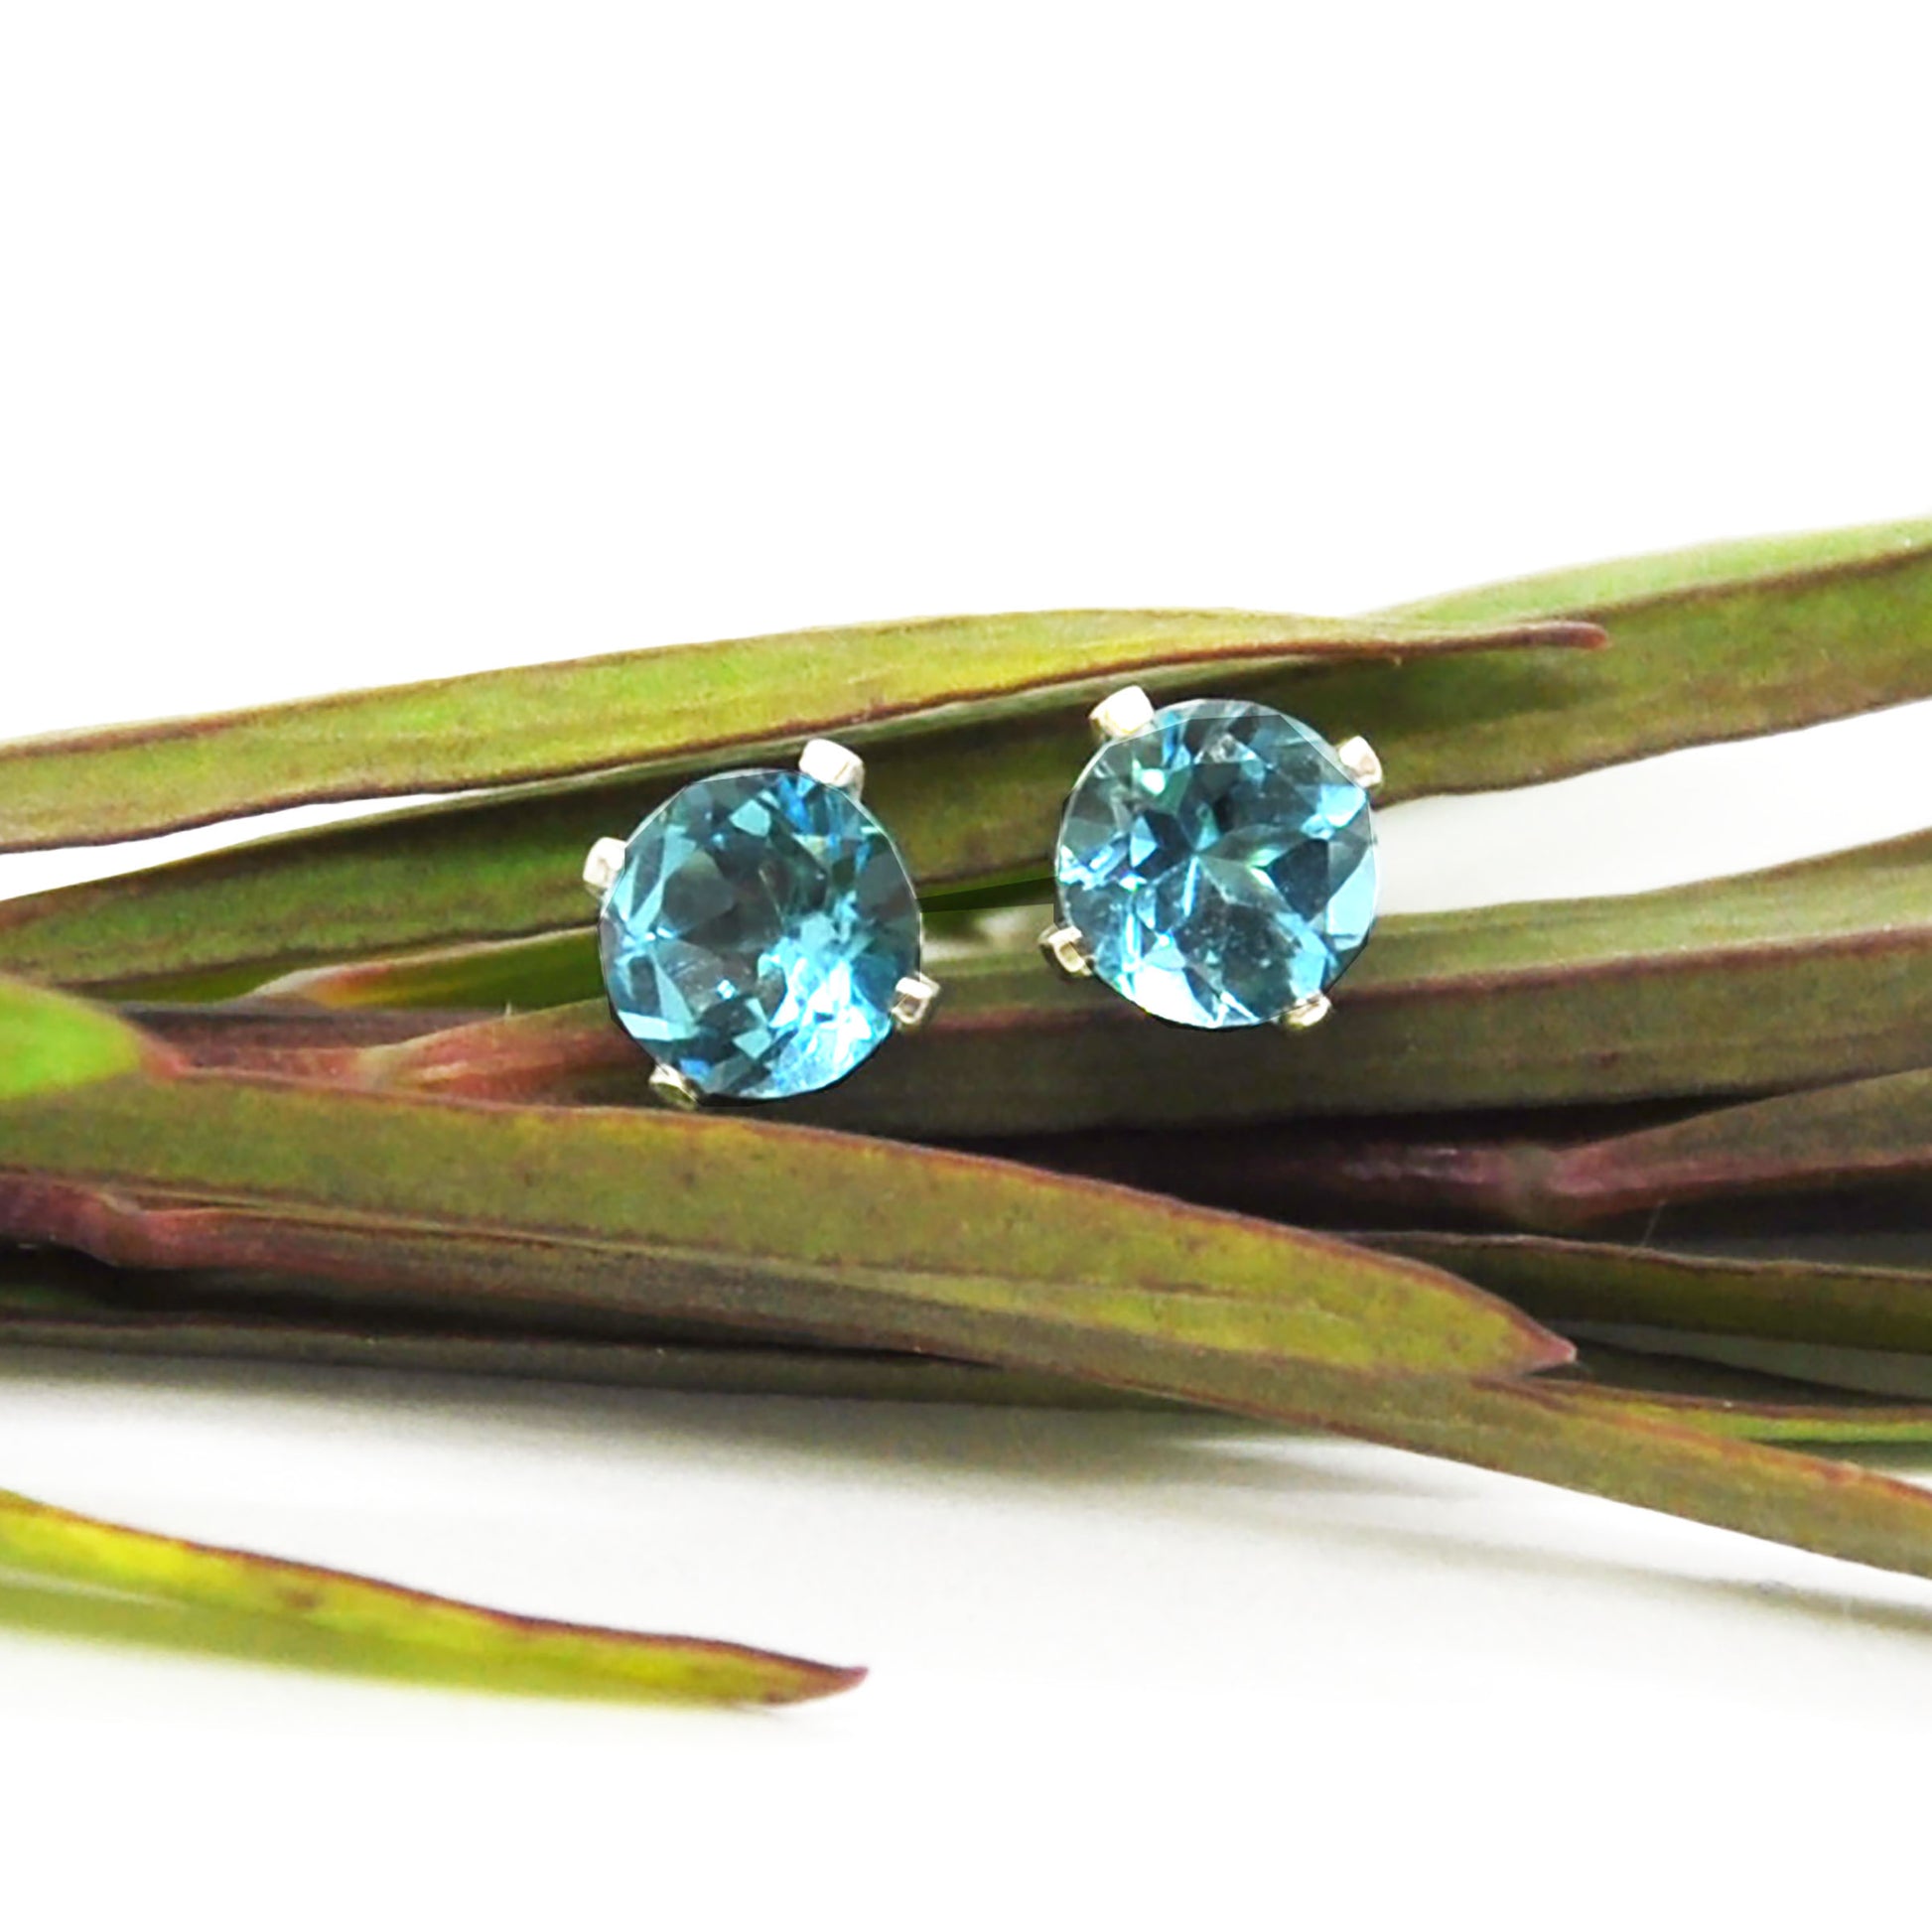 Silver 4 claw stud earrings with bright blue topaz gemstones. Pictured with leaves.